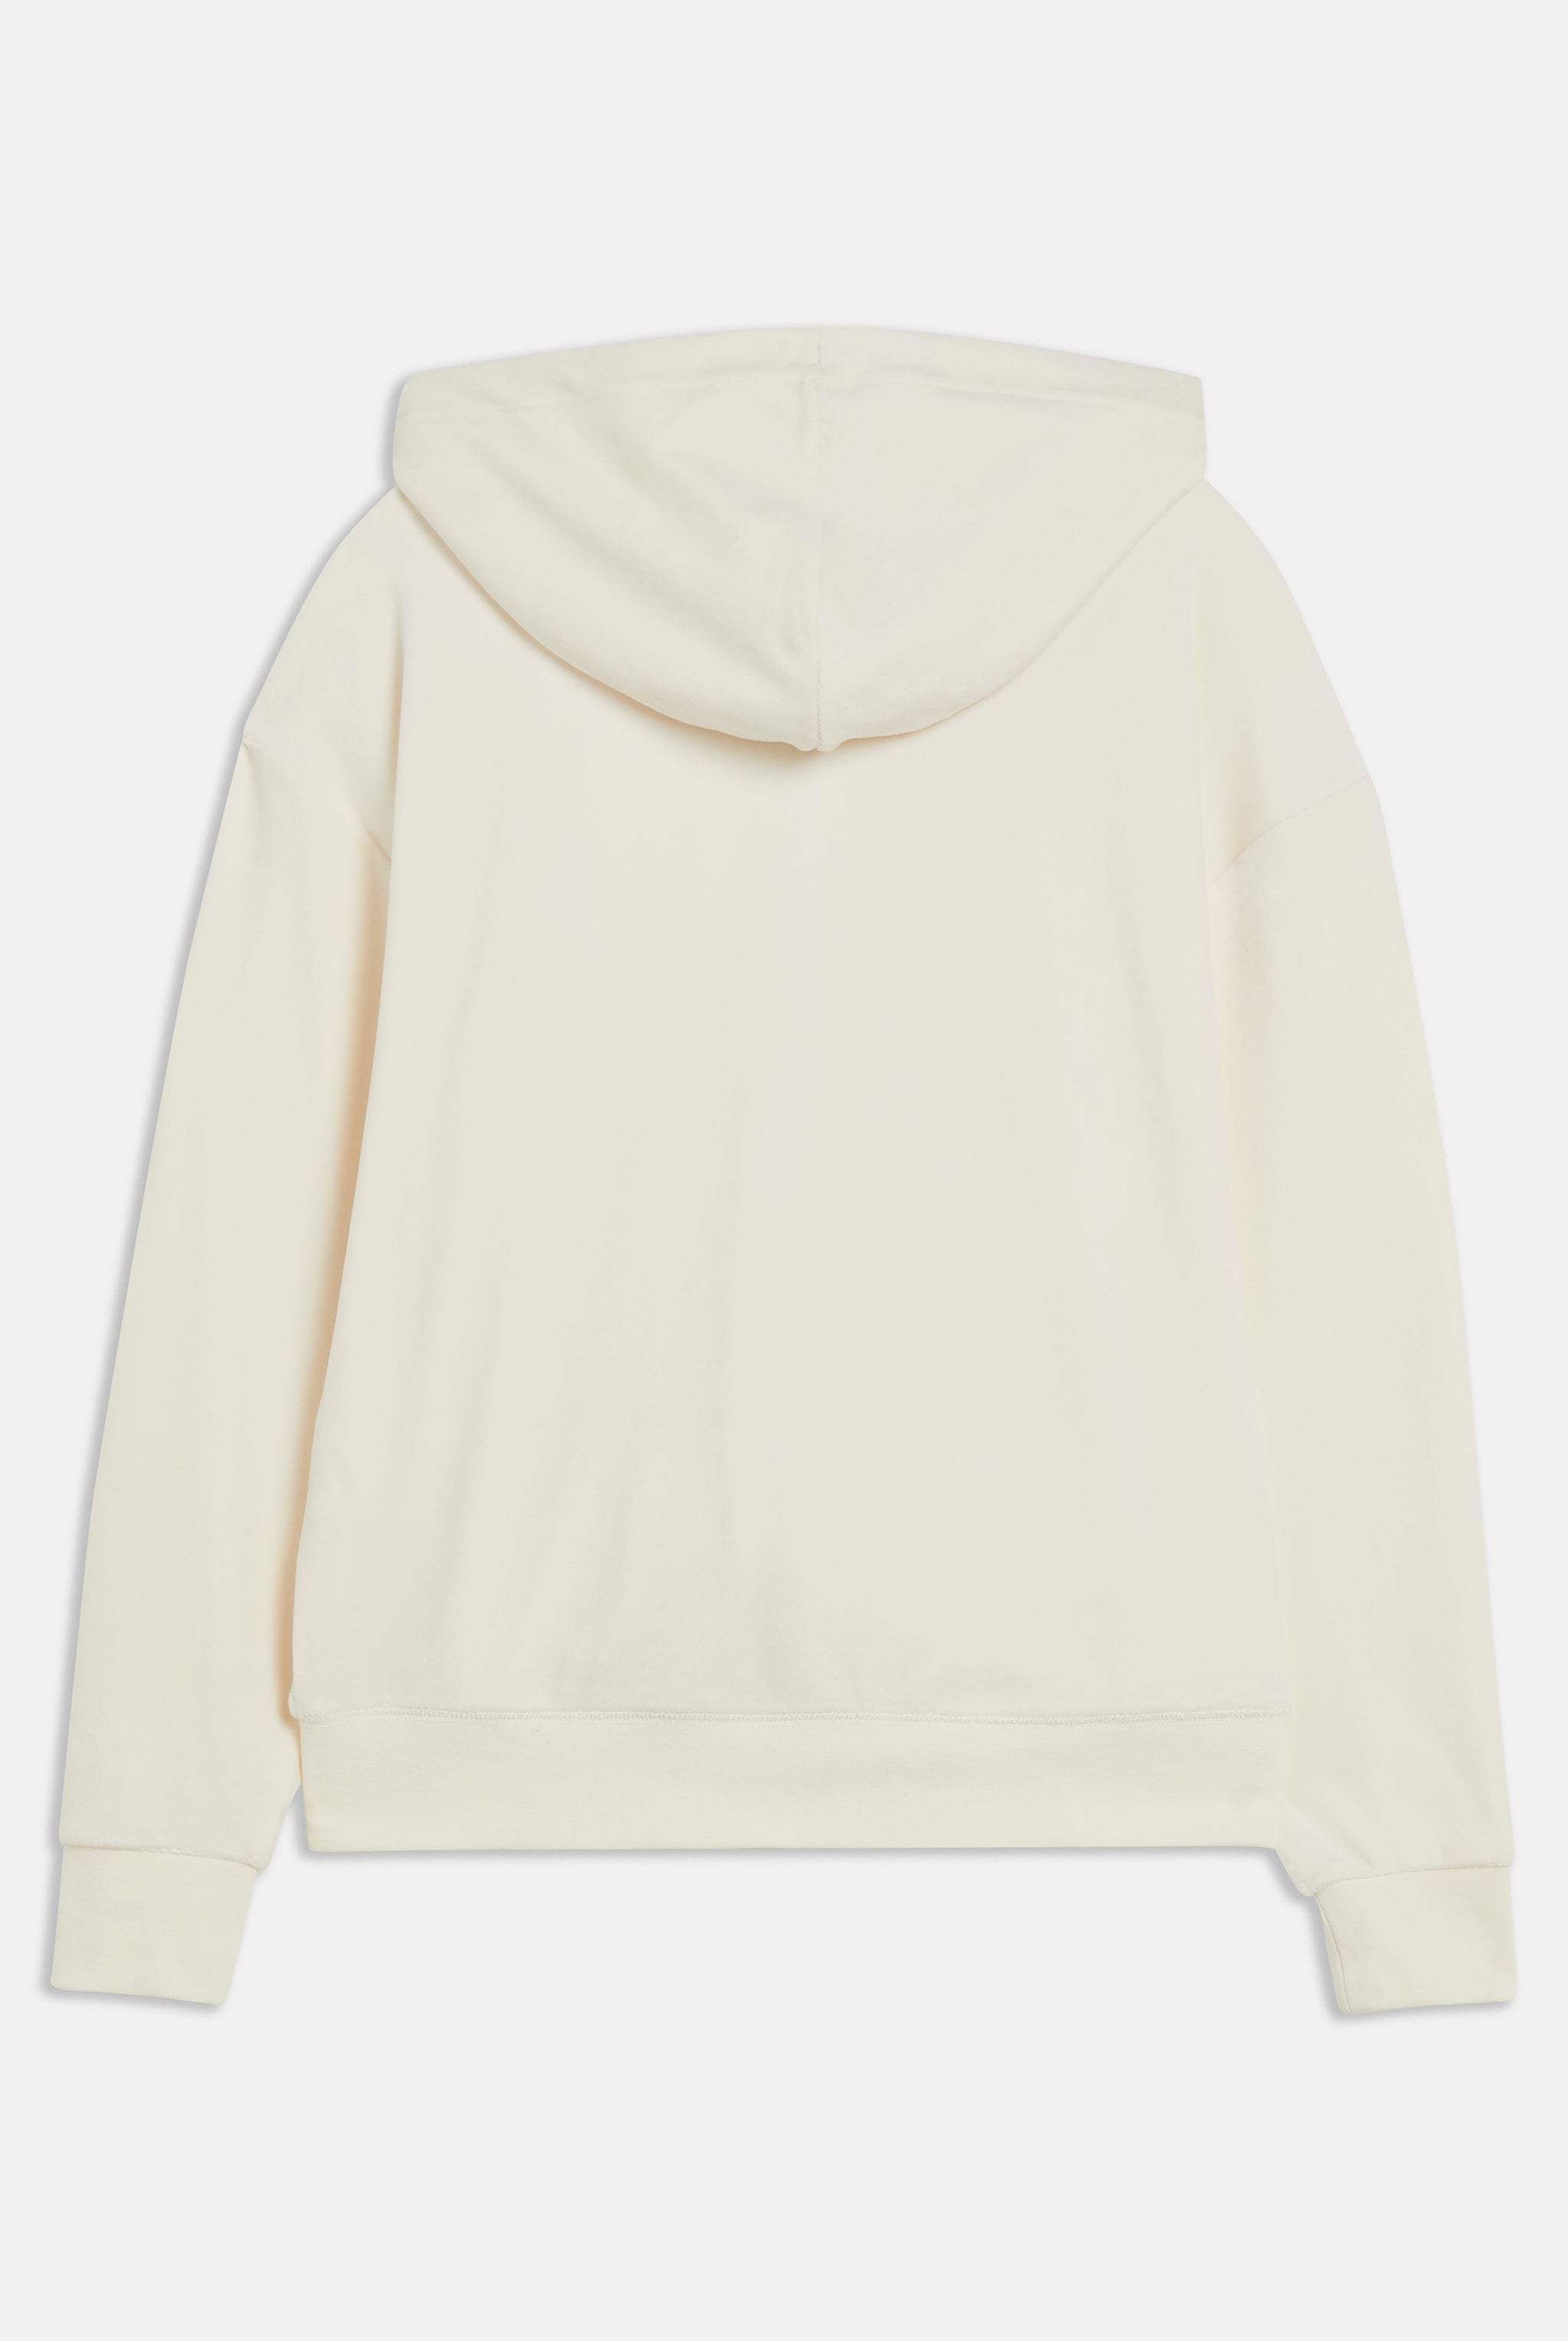 CREAM / GOLD CLASSIC VELOUR OVERSIZED HOODIE – Juicy Couture UK